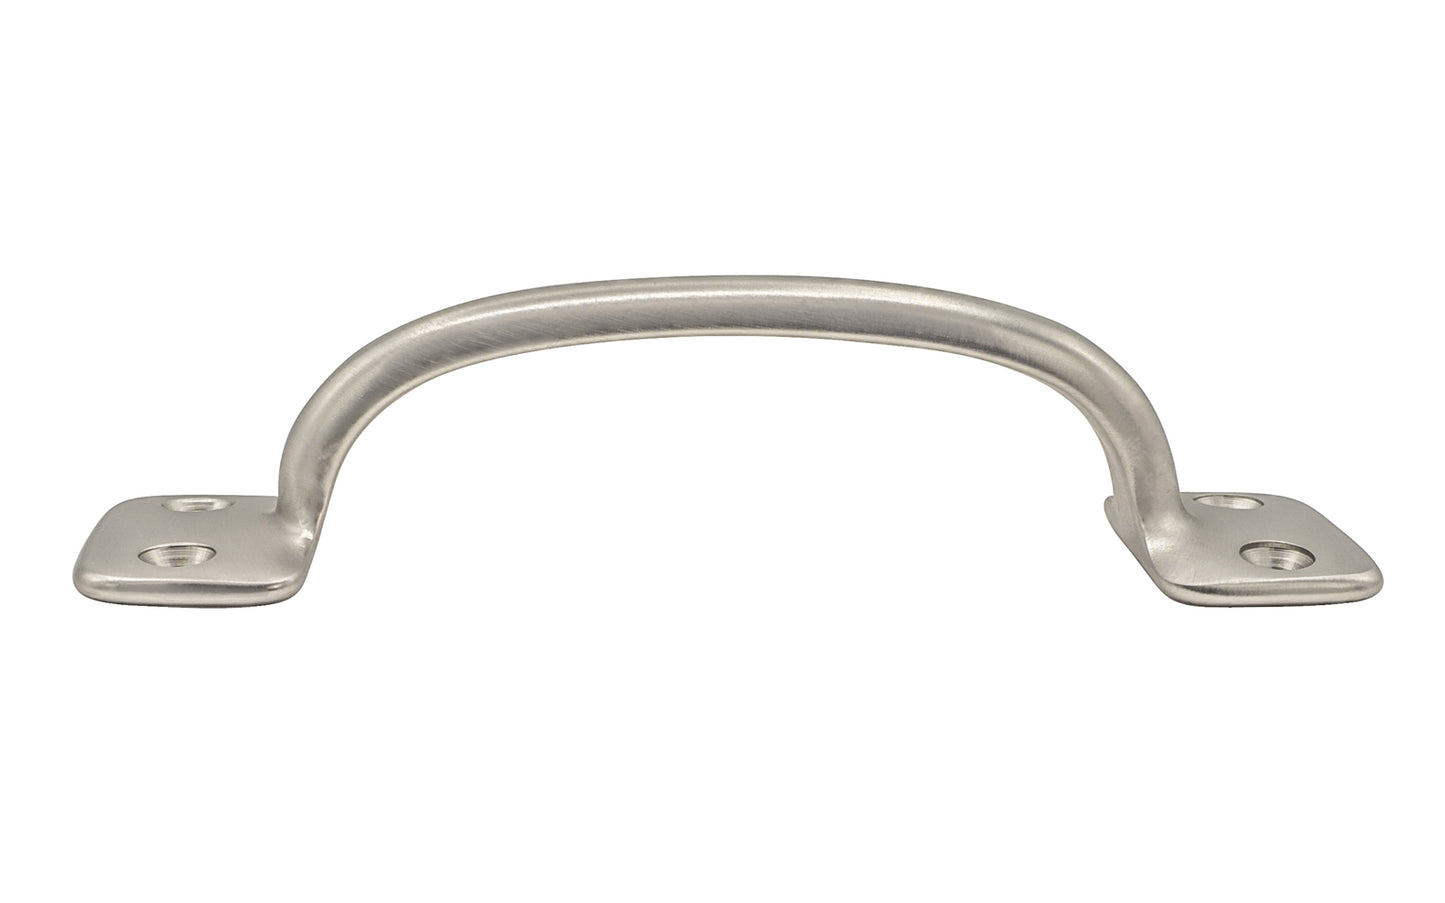 Vintage-style Hardware · Classic Solid Brass Handle Pull ~ 4" On Centers. Versatile handle is great for sash windows, cabinets, drawers, file cabinets. Arts & Crafts handle pull. Brushed Nickel Finish.